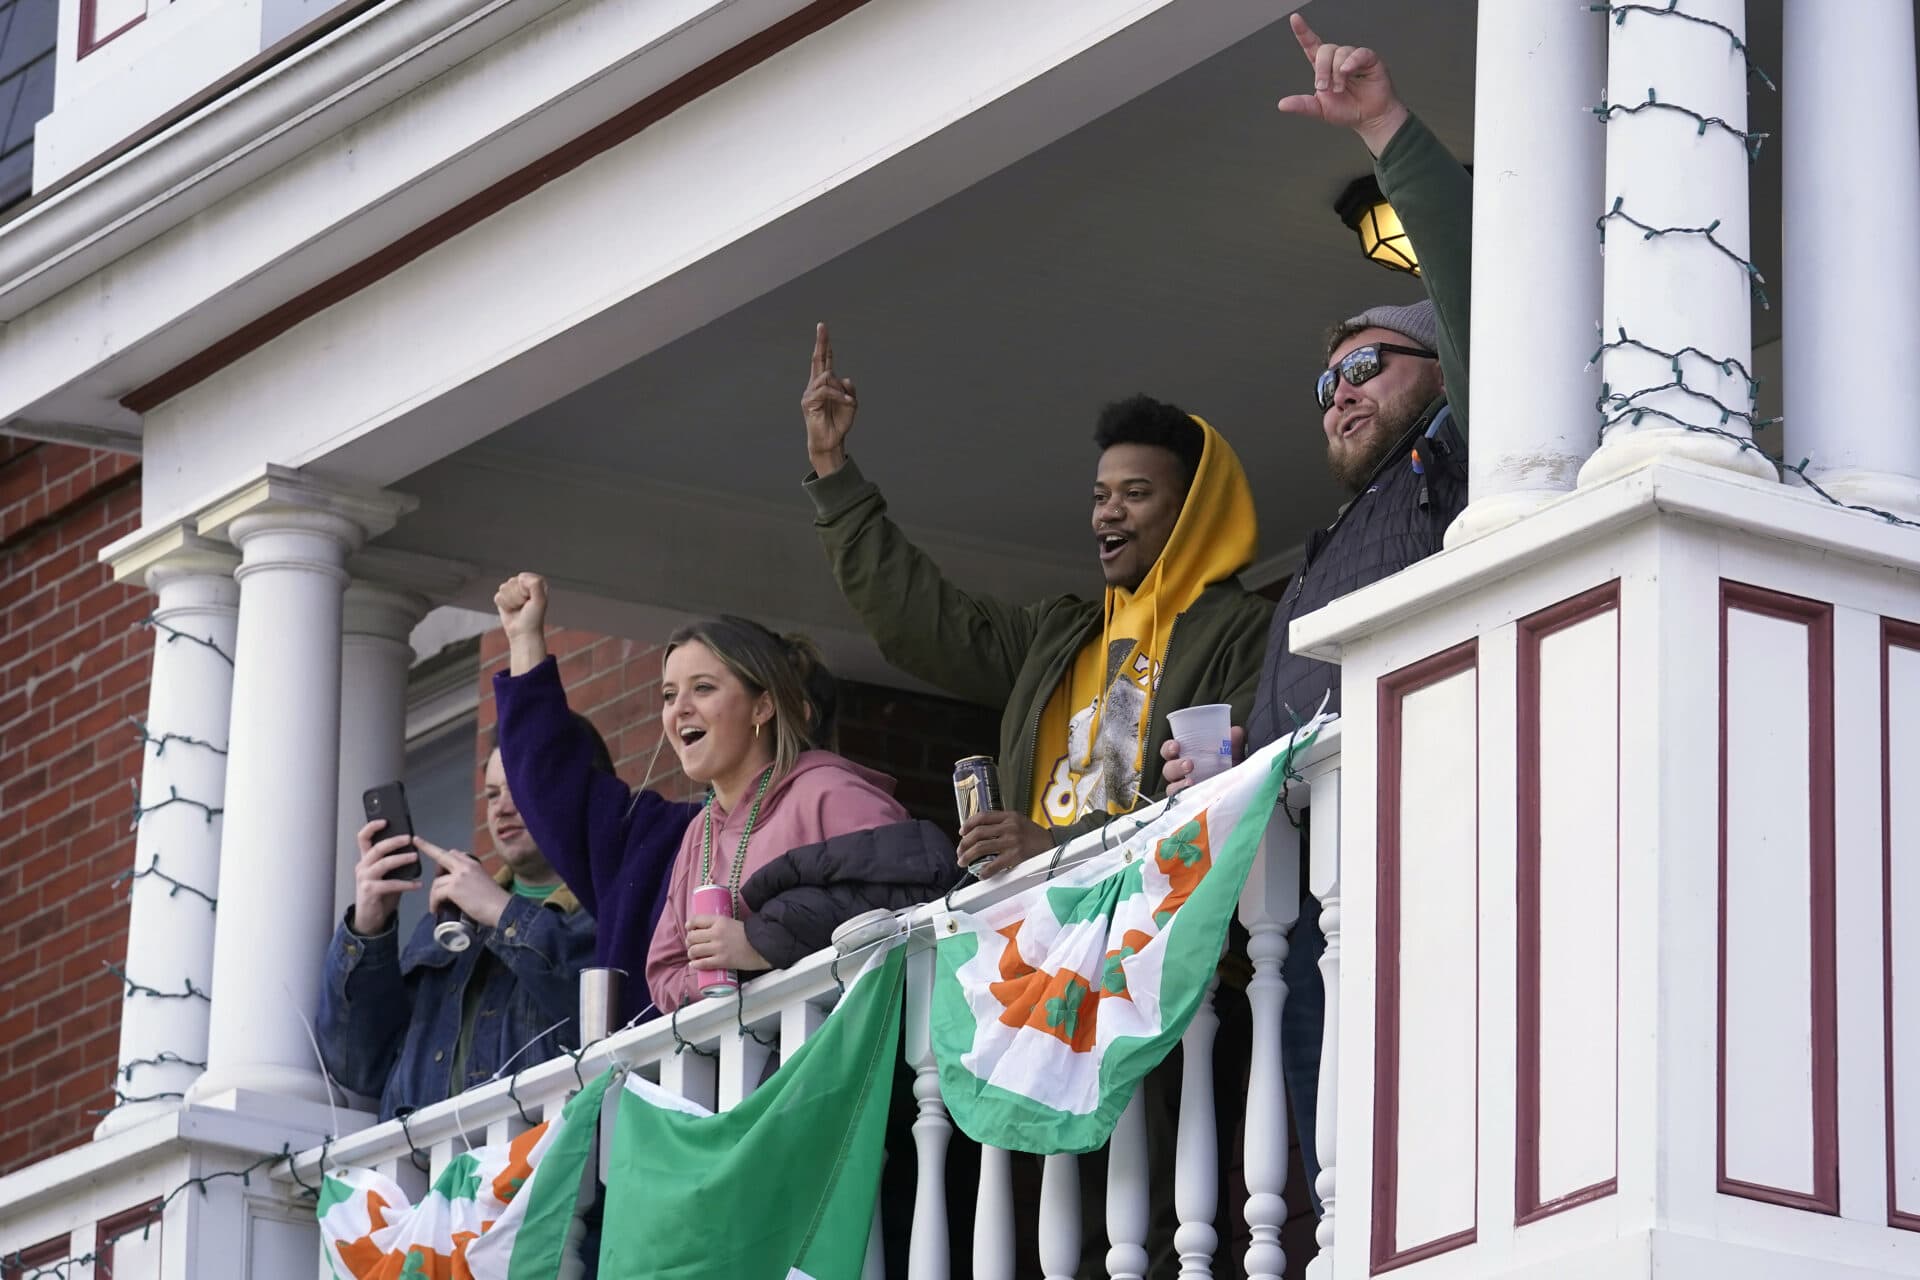 Spectators cheer during the annual St. Patrick's Day parade. (Steven Senne/AP)